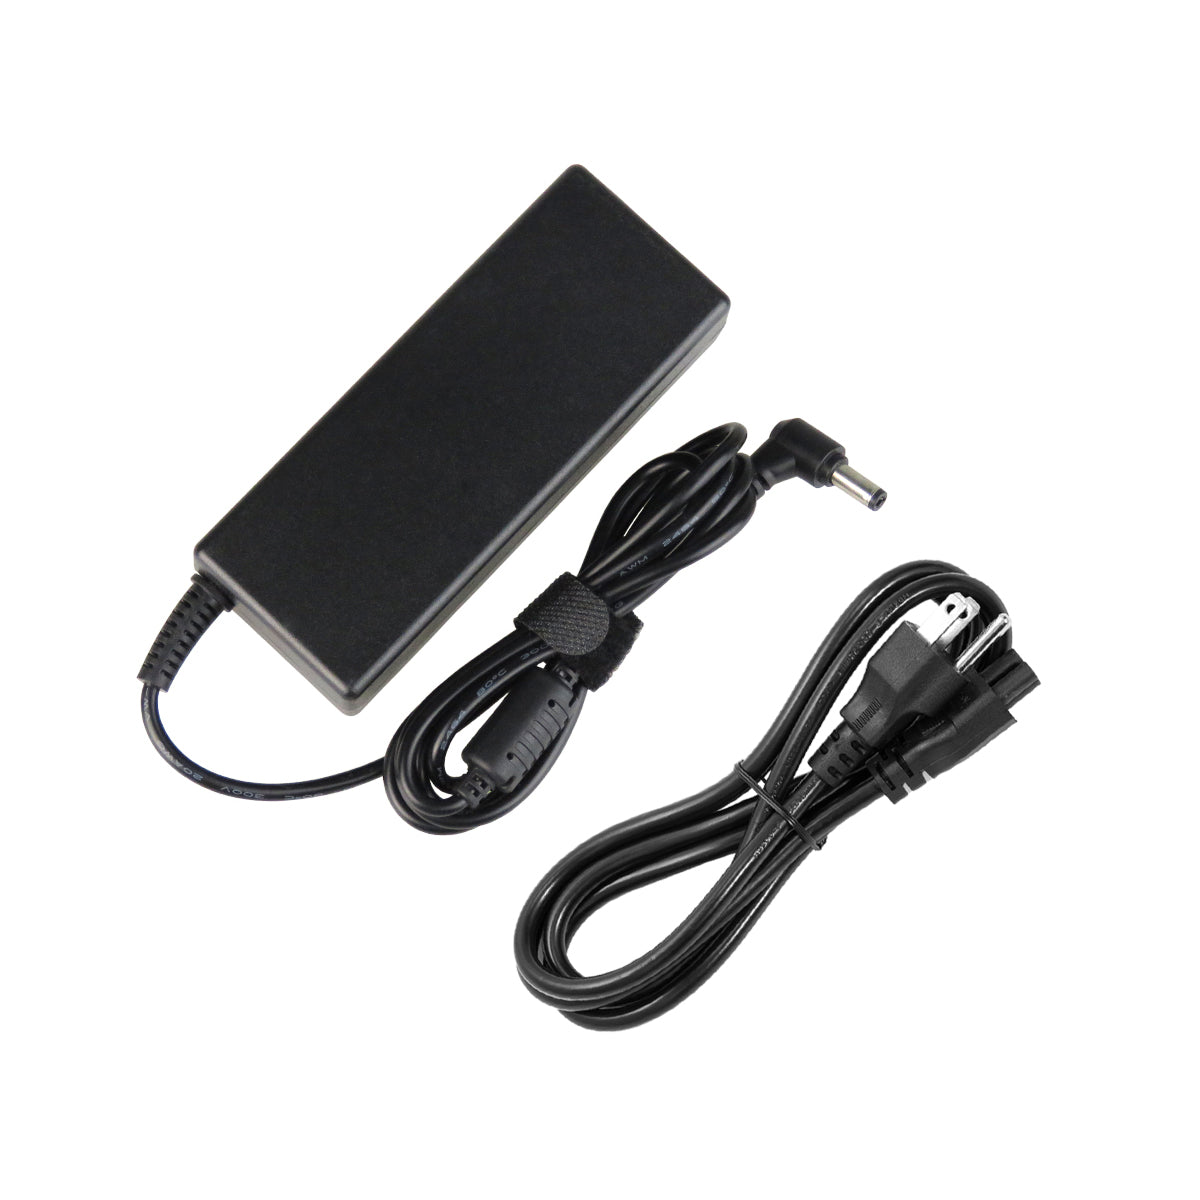 AC Adapter Charger for ASUS N81Ve Notebook.